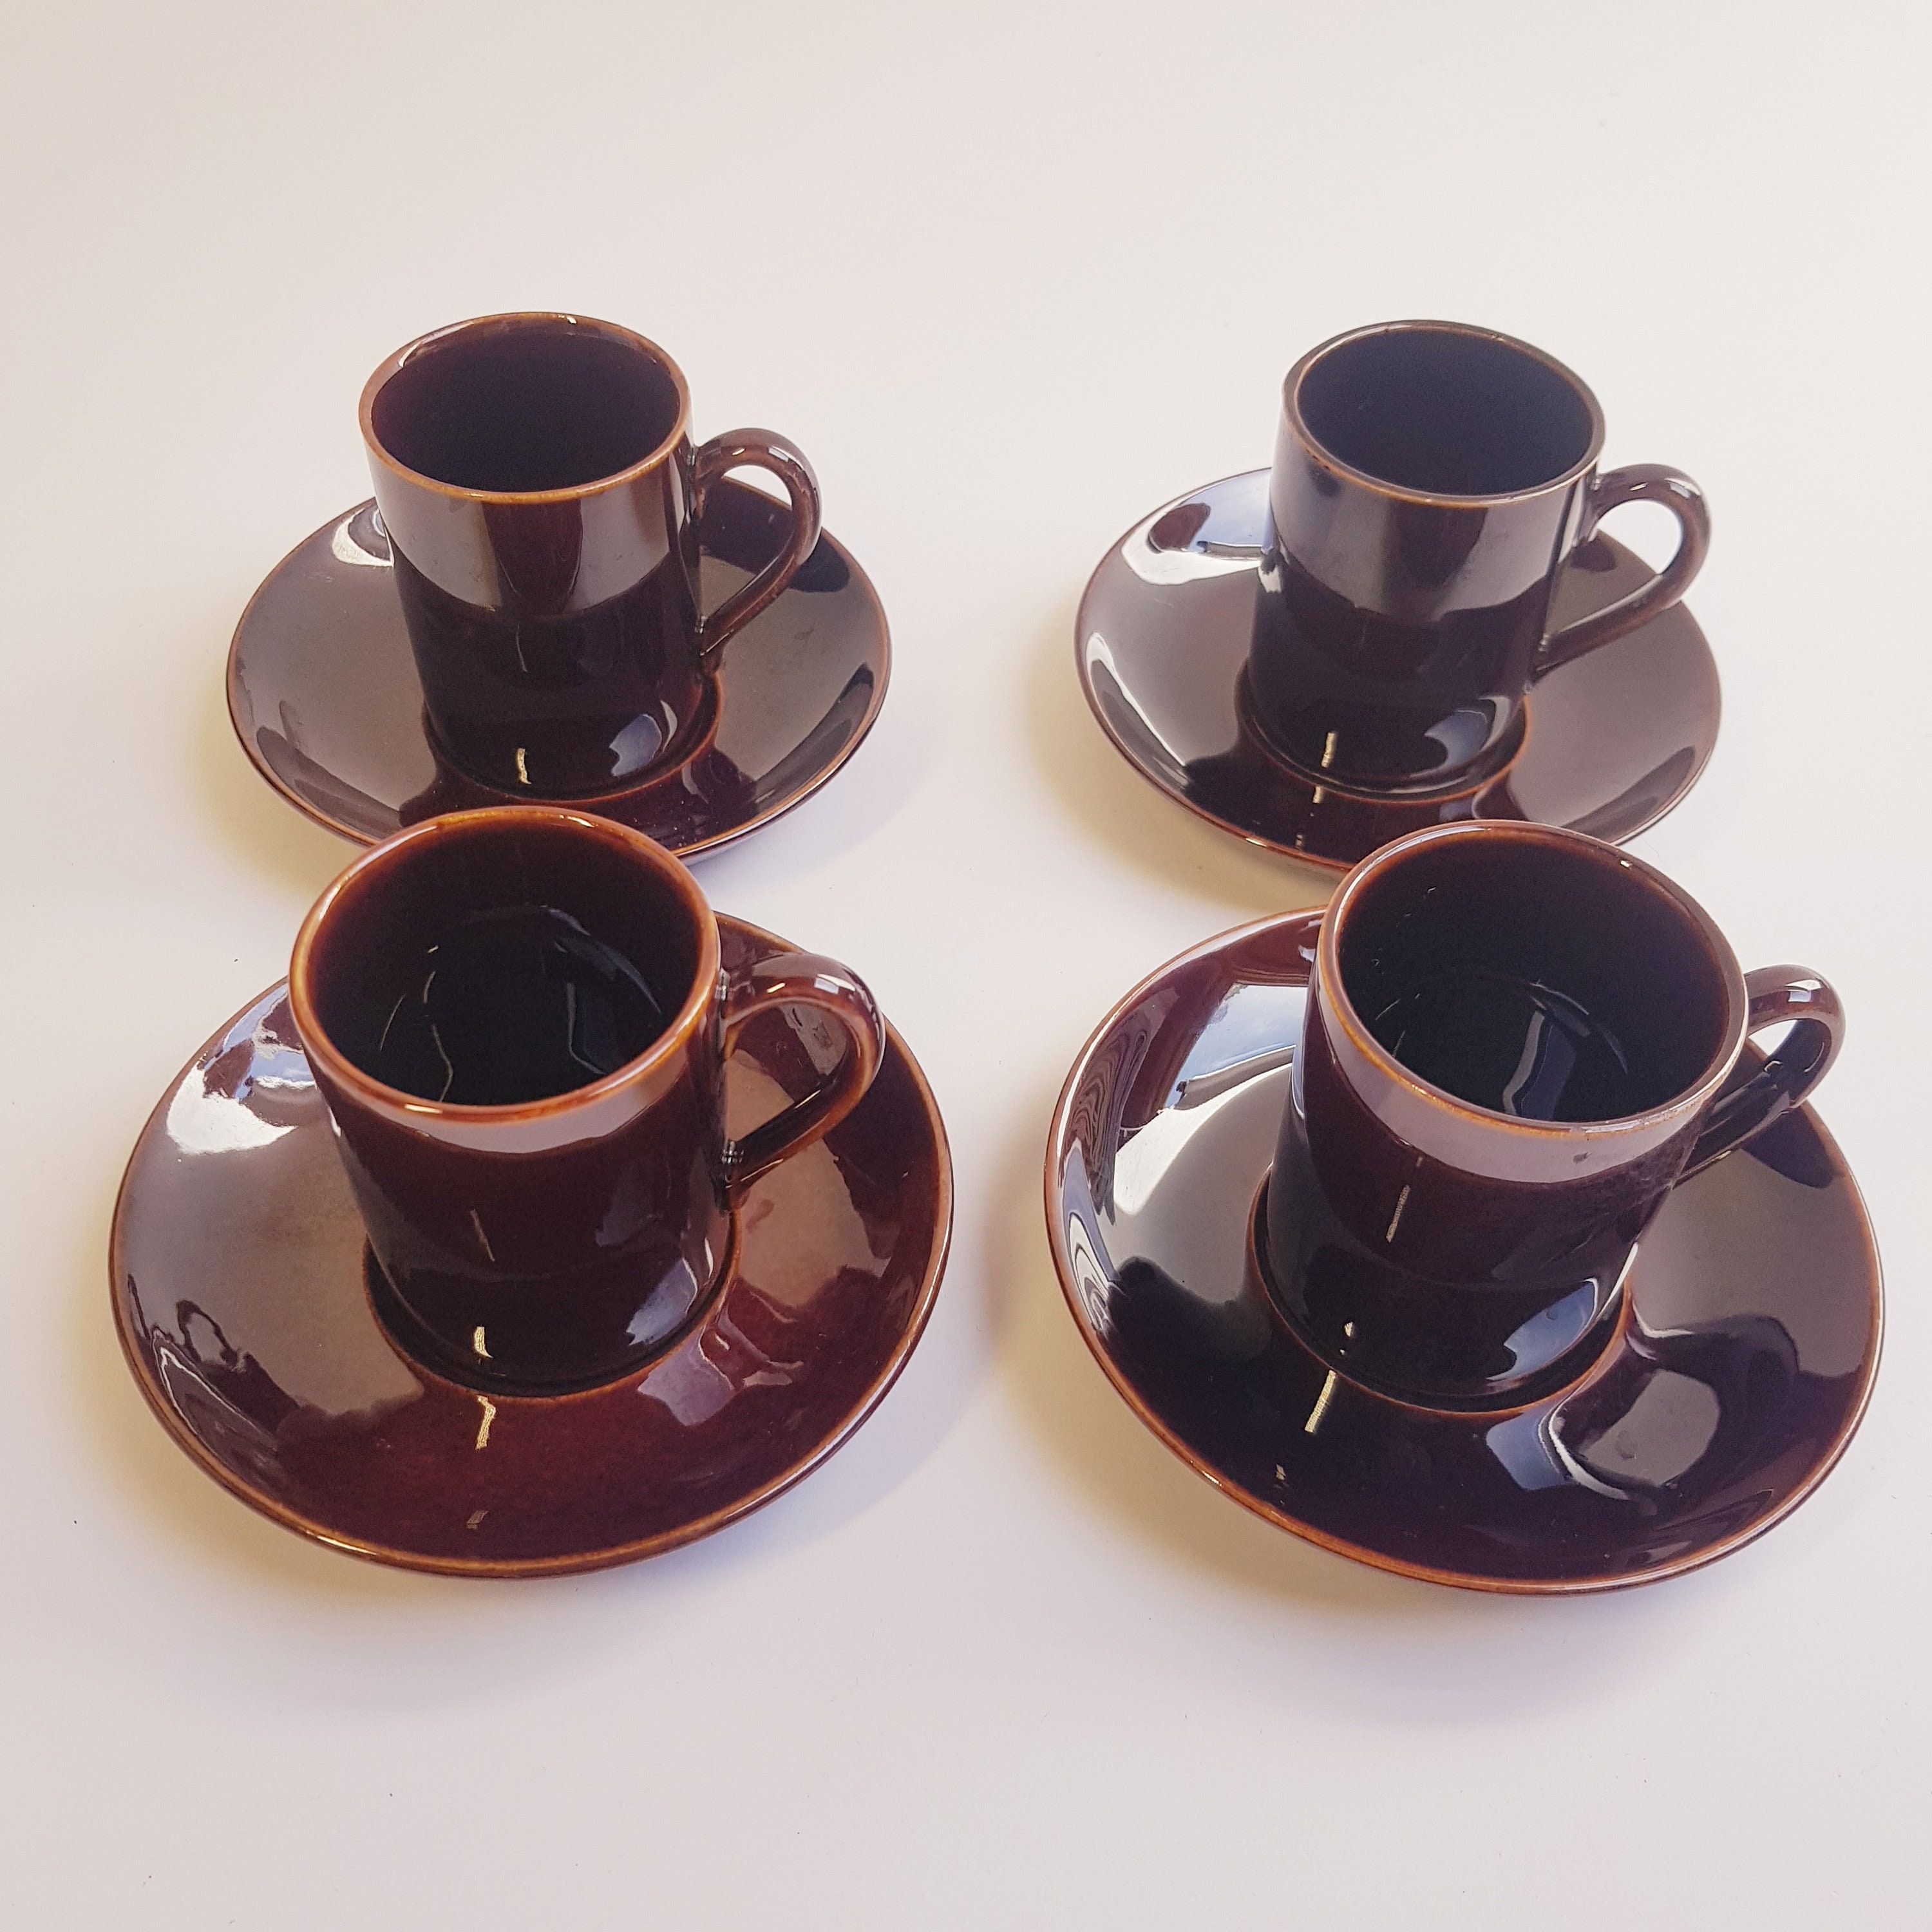 Nice Pair of PTM Espresso Cups, Italian Espresso Cups, Marked Ptm Made in  Italy 